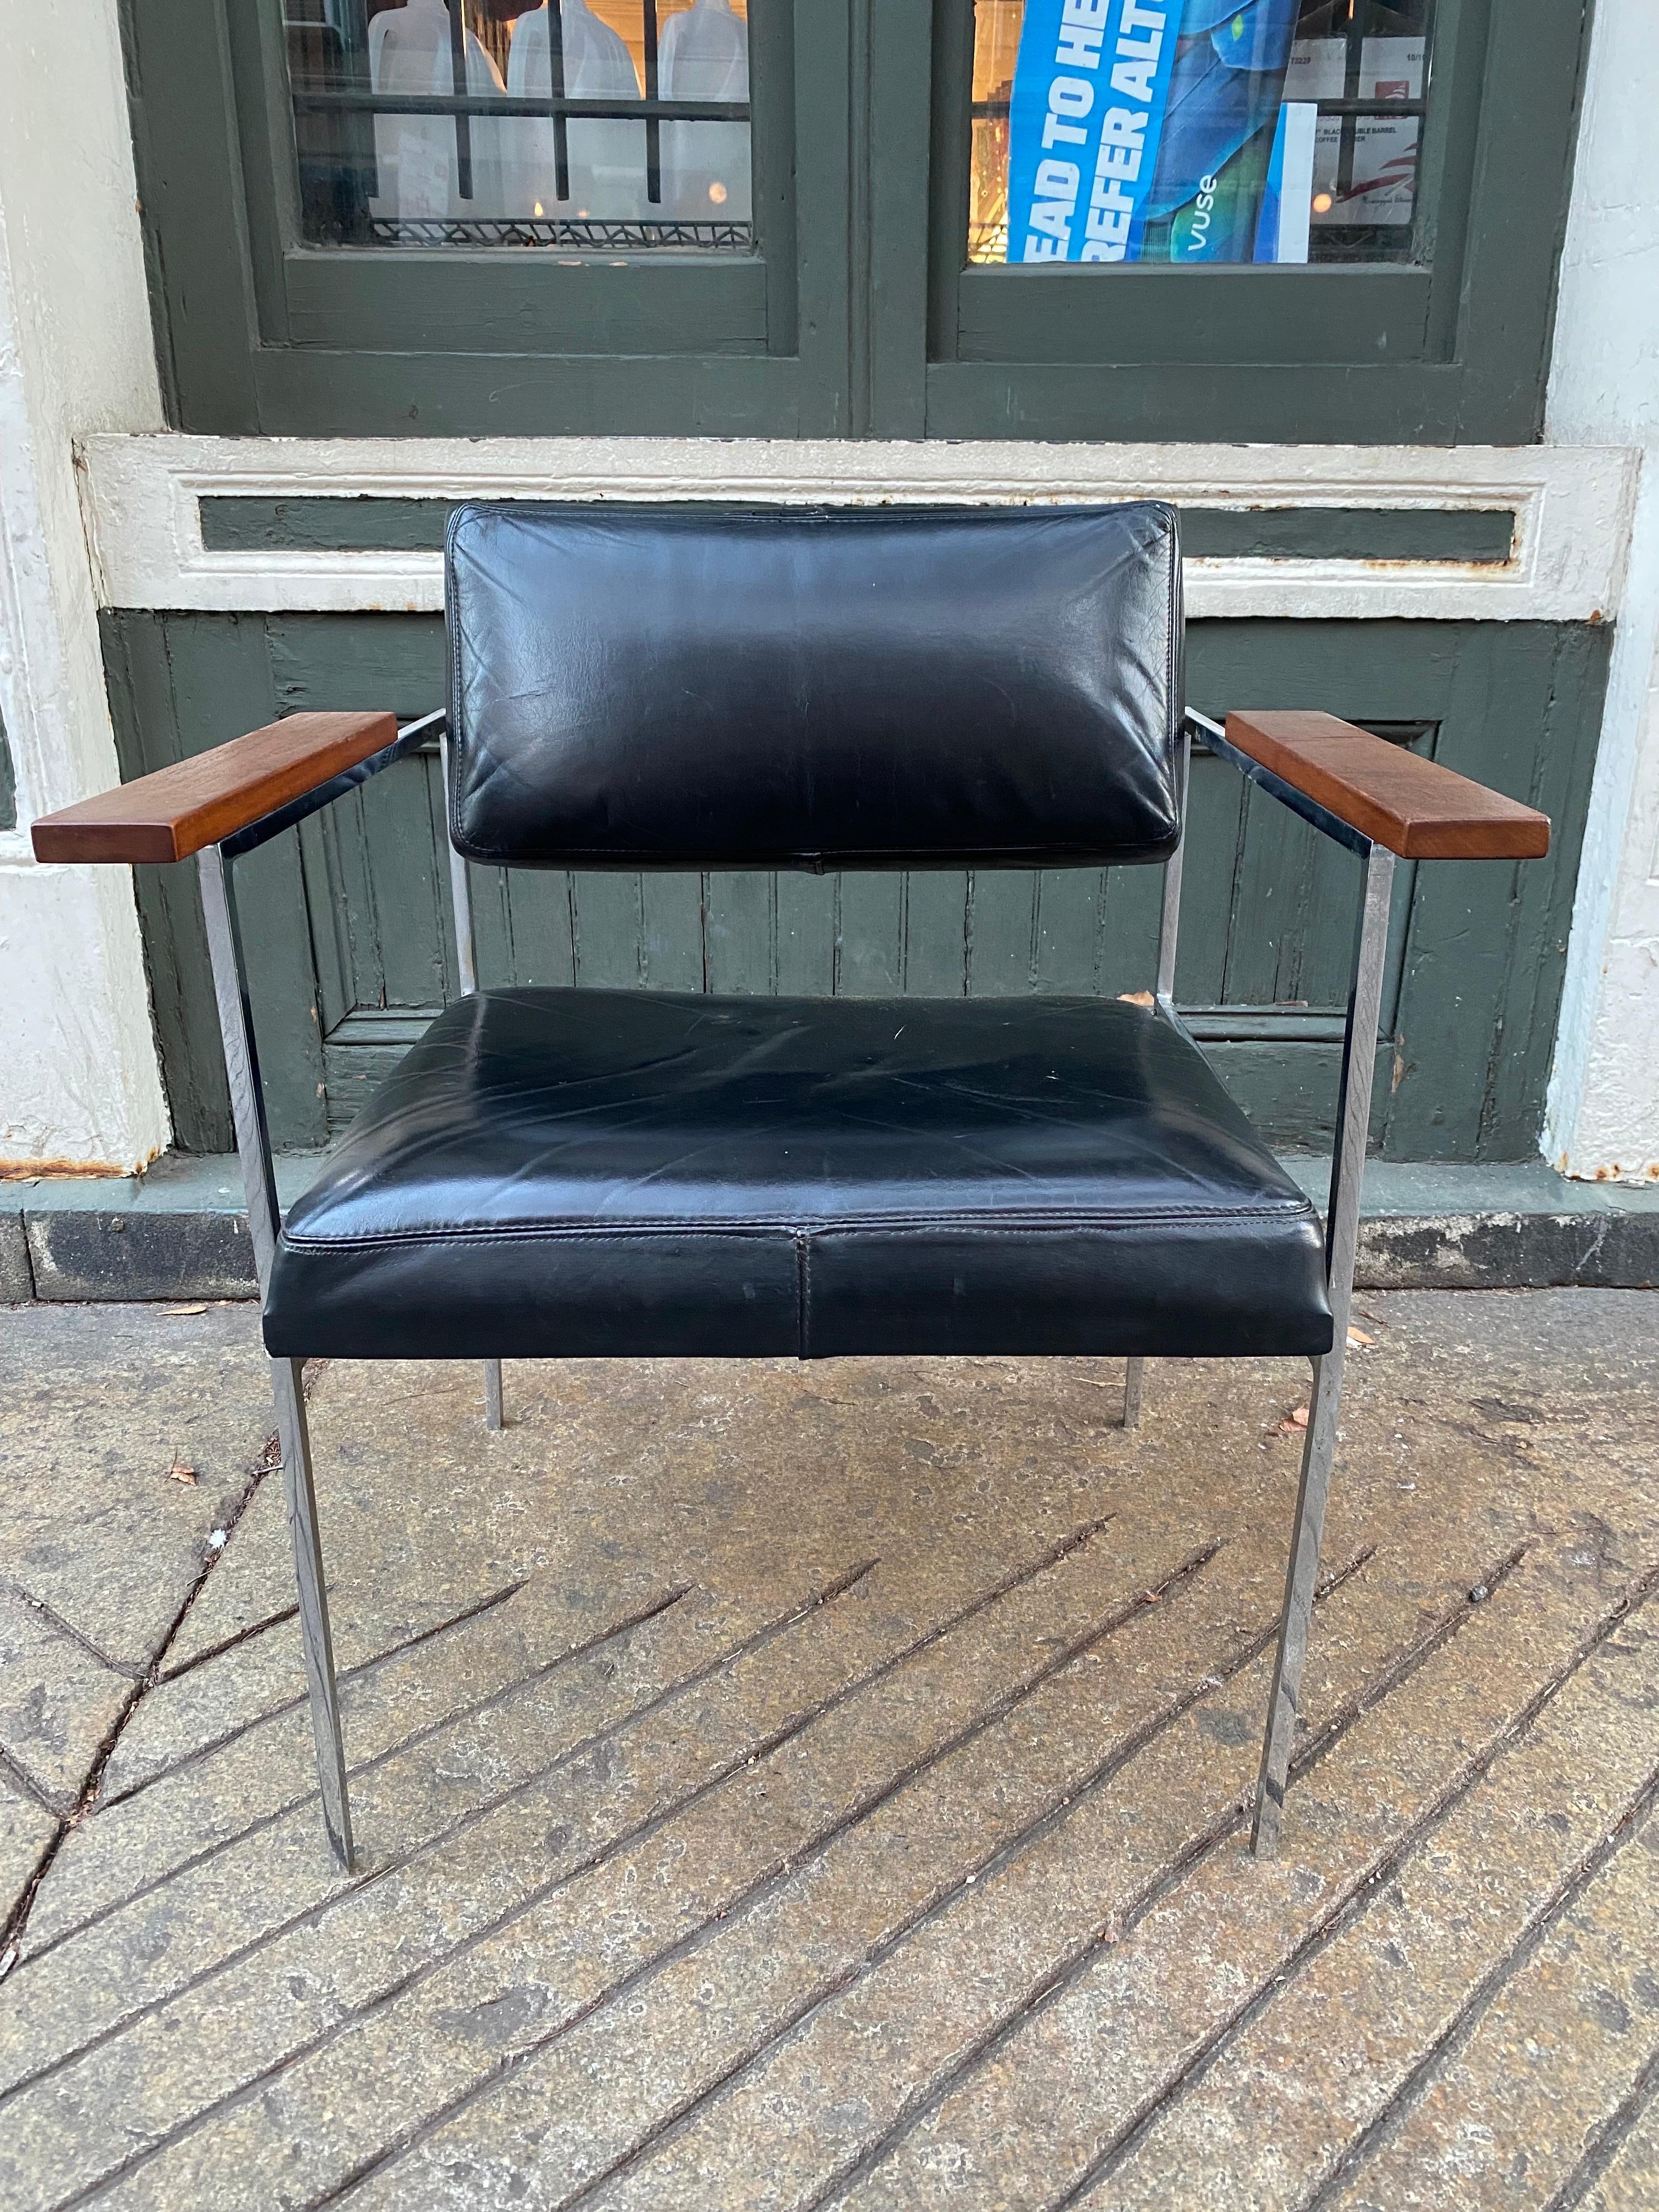 Elegant lines and comfortable occasional chair. Beautiful vintage, completely original, early version of this scarce chair designed by George Nelson for Herman Miller. The chrome is in excellent condition with original black Leather Upholstery!